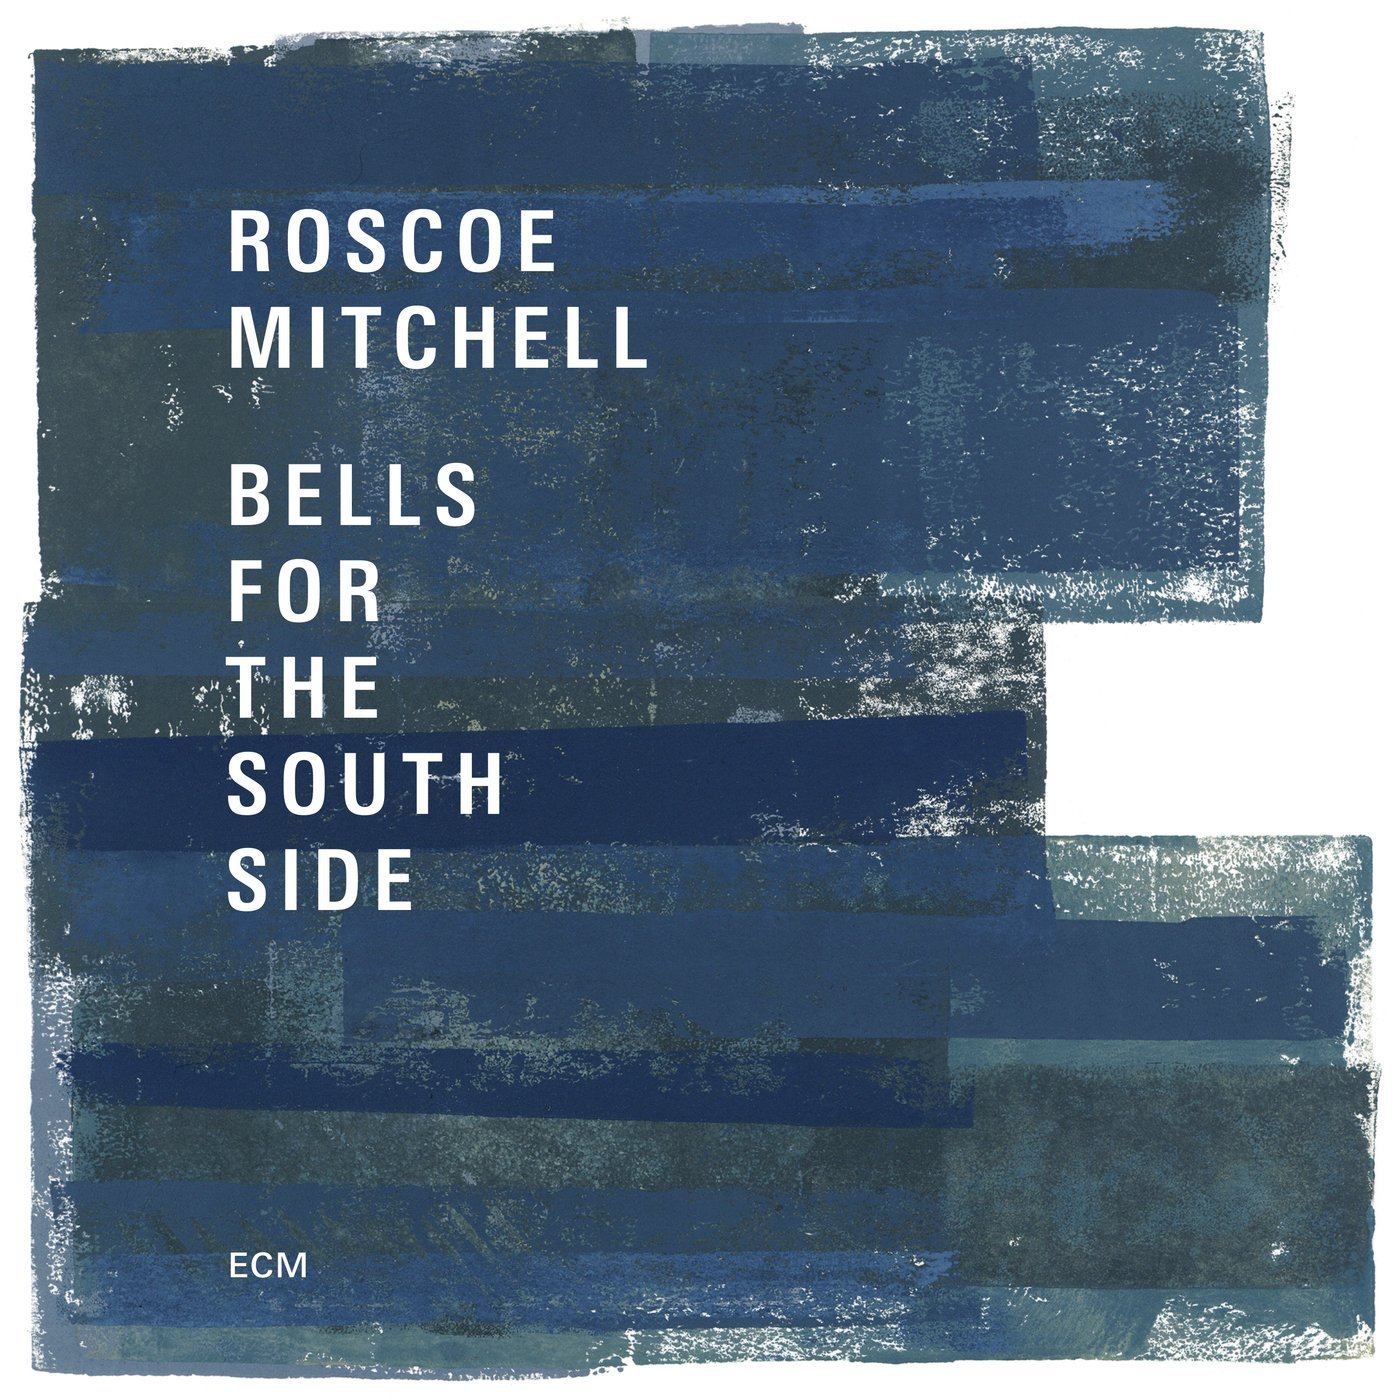 Roscoe Mitchell - Bells For The South Side (2017) [HDTracks FLAC 24bit/48kHz]